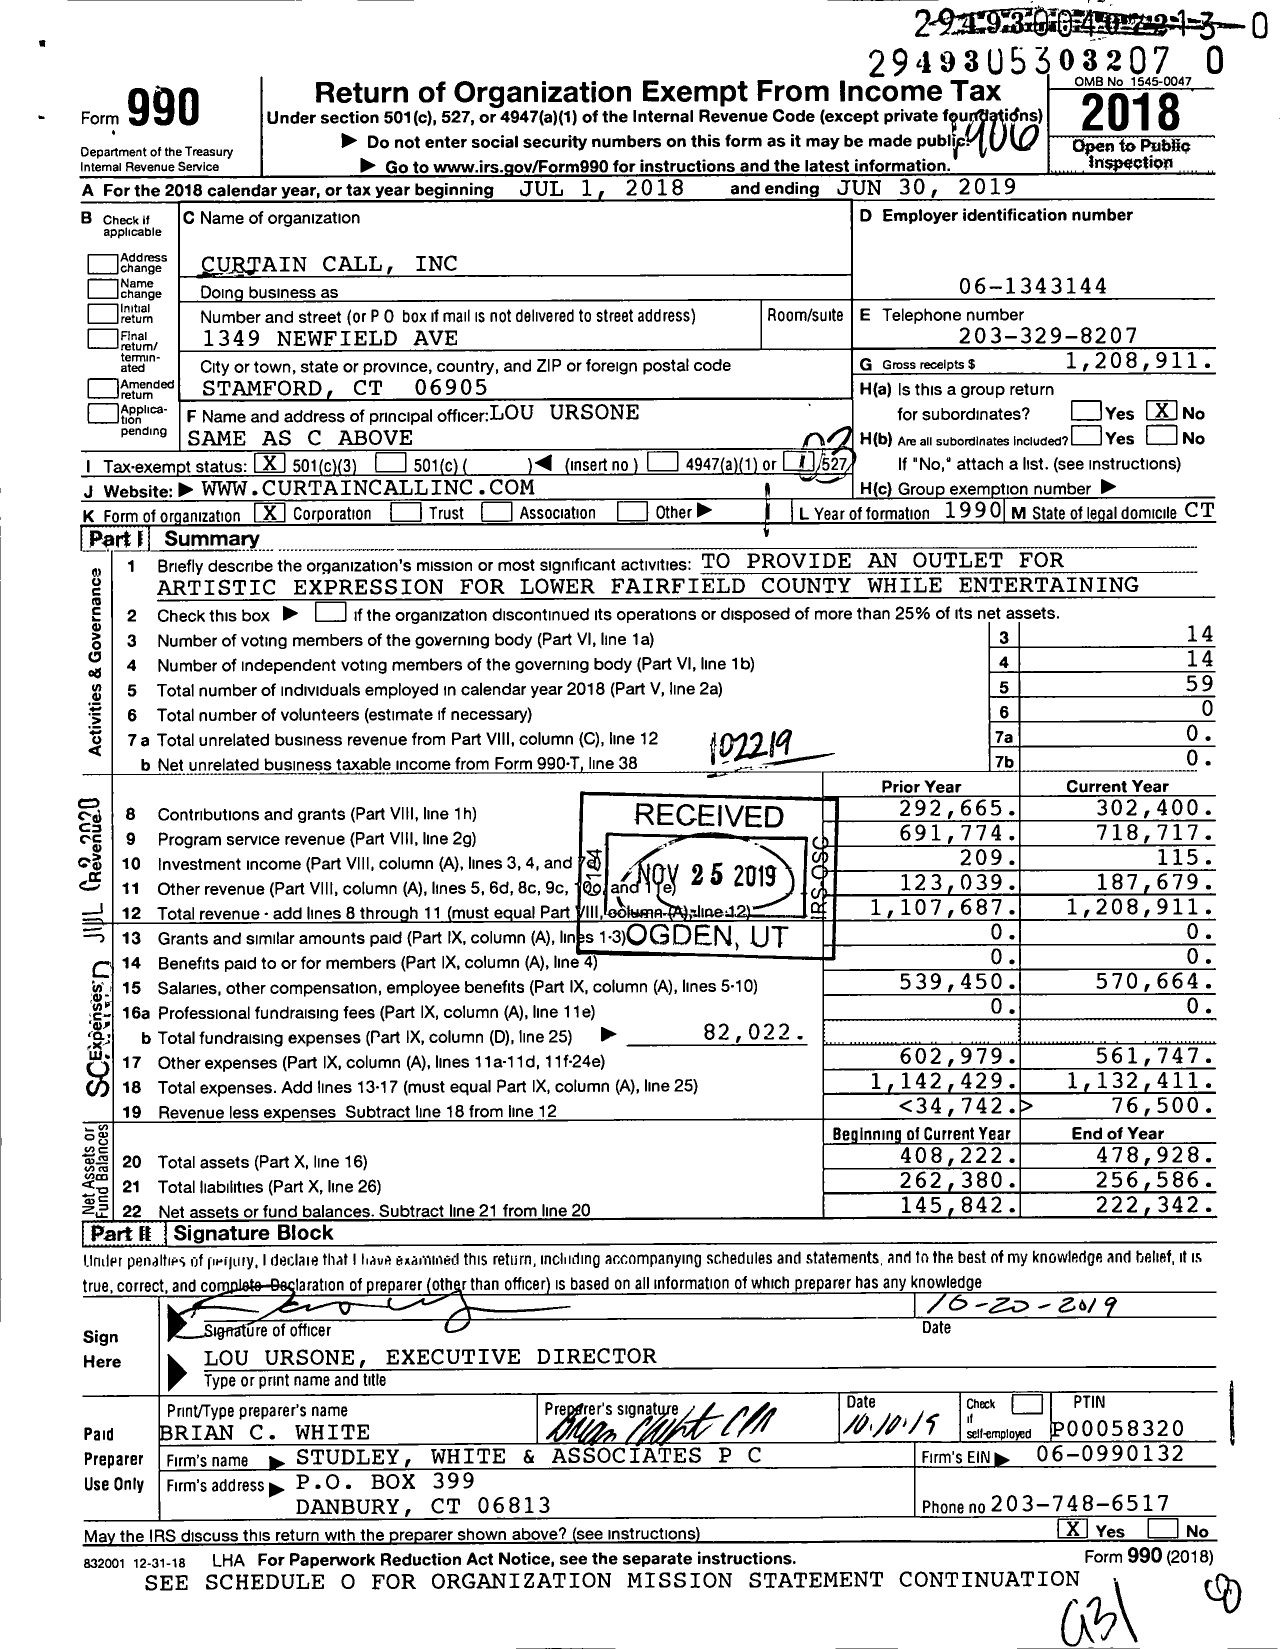 Image of first page of 2018 Form 990 for Curtain Call